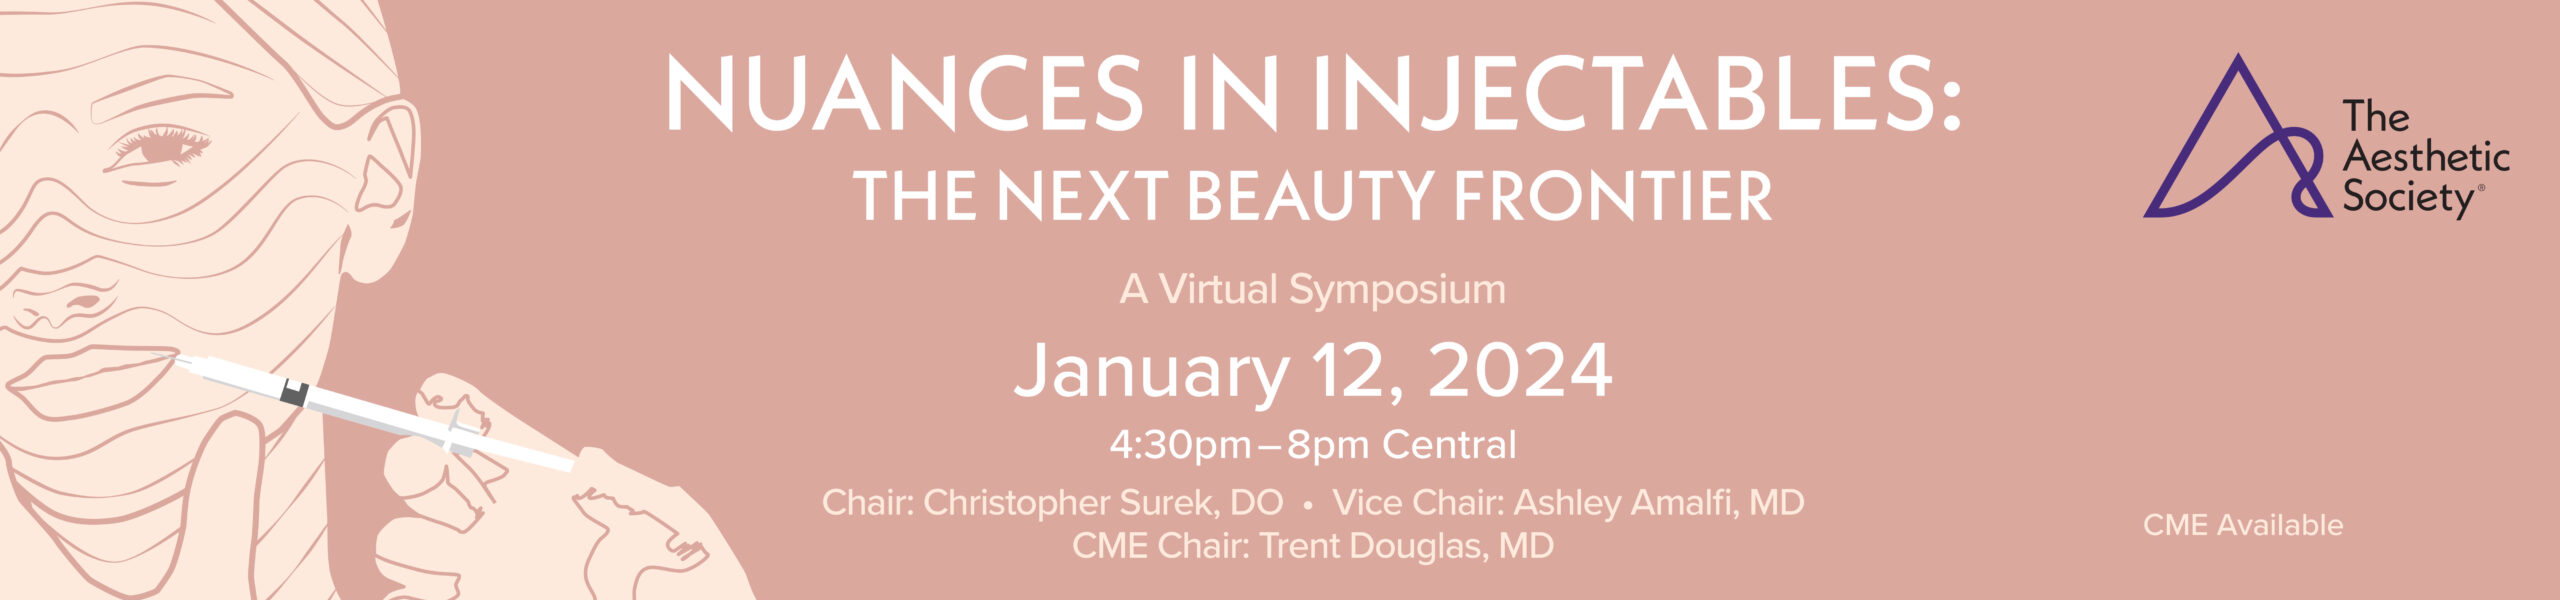 CME Nuances in Injectables: The Next Beauty Frontier video course 2024